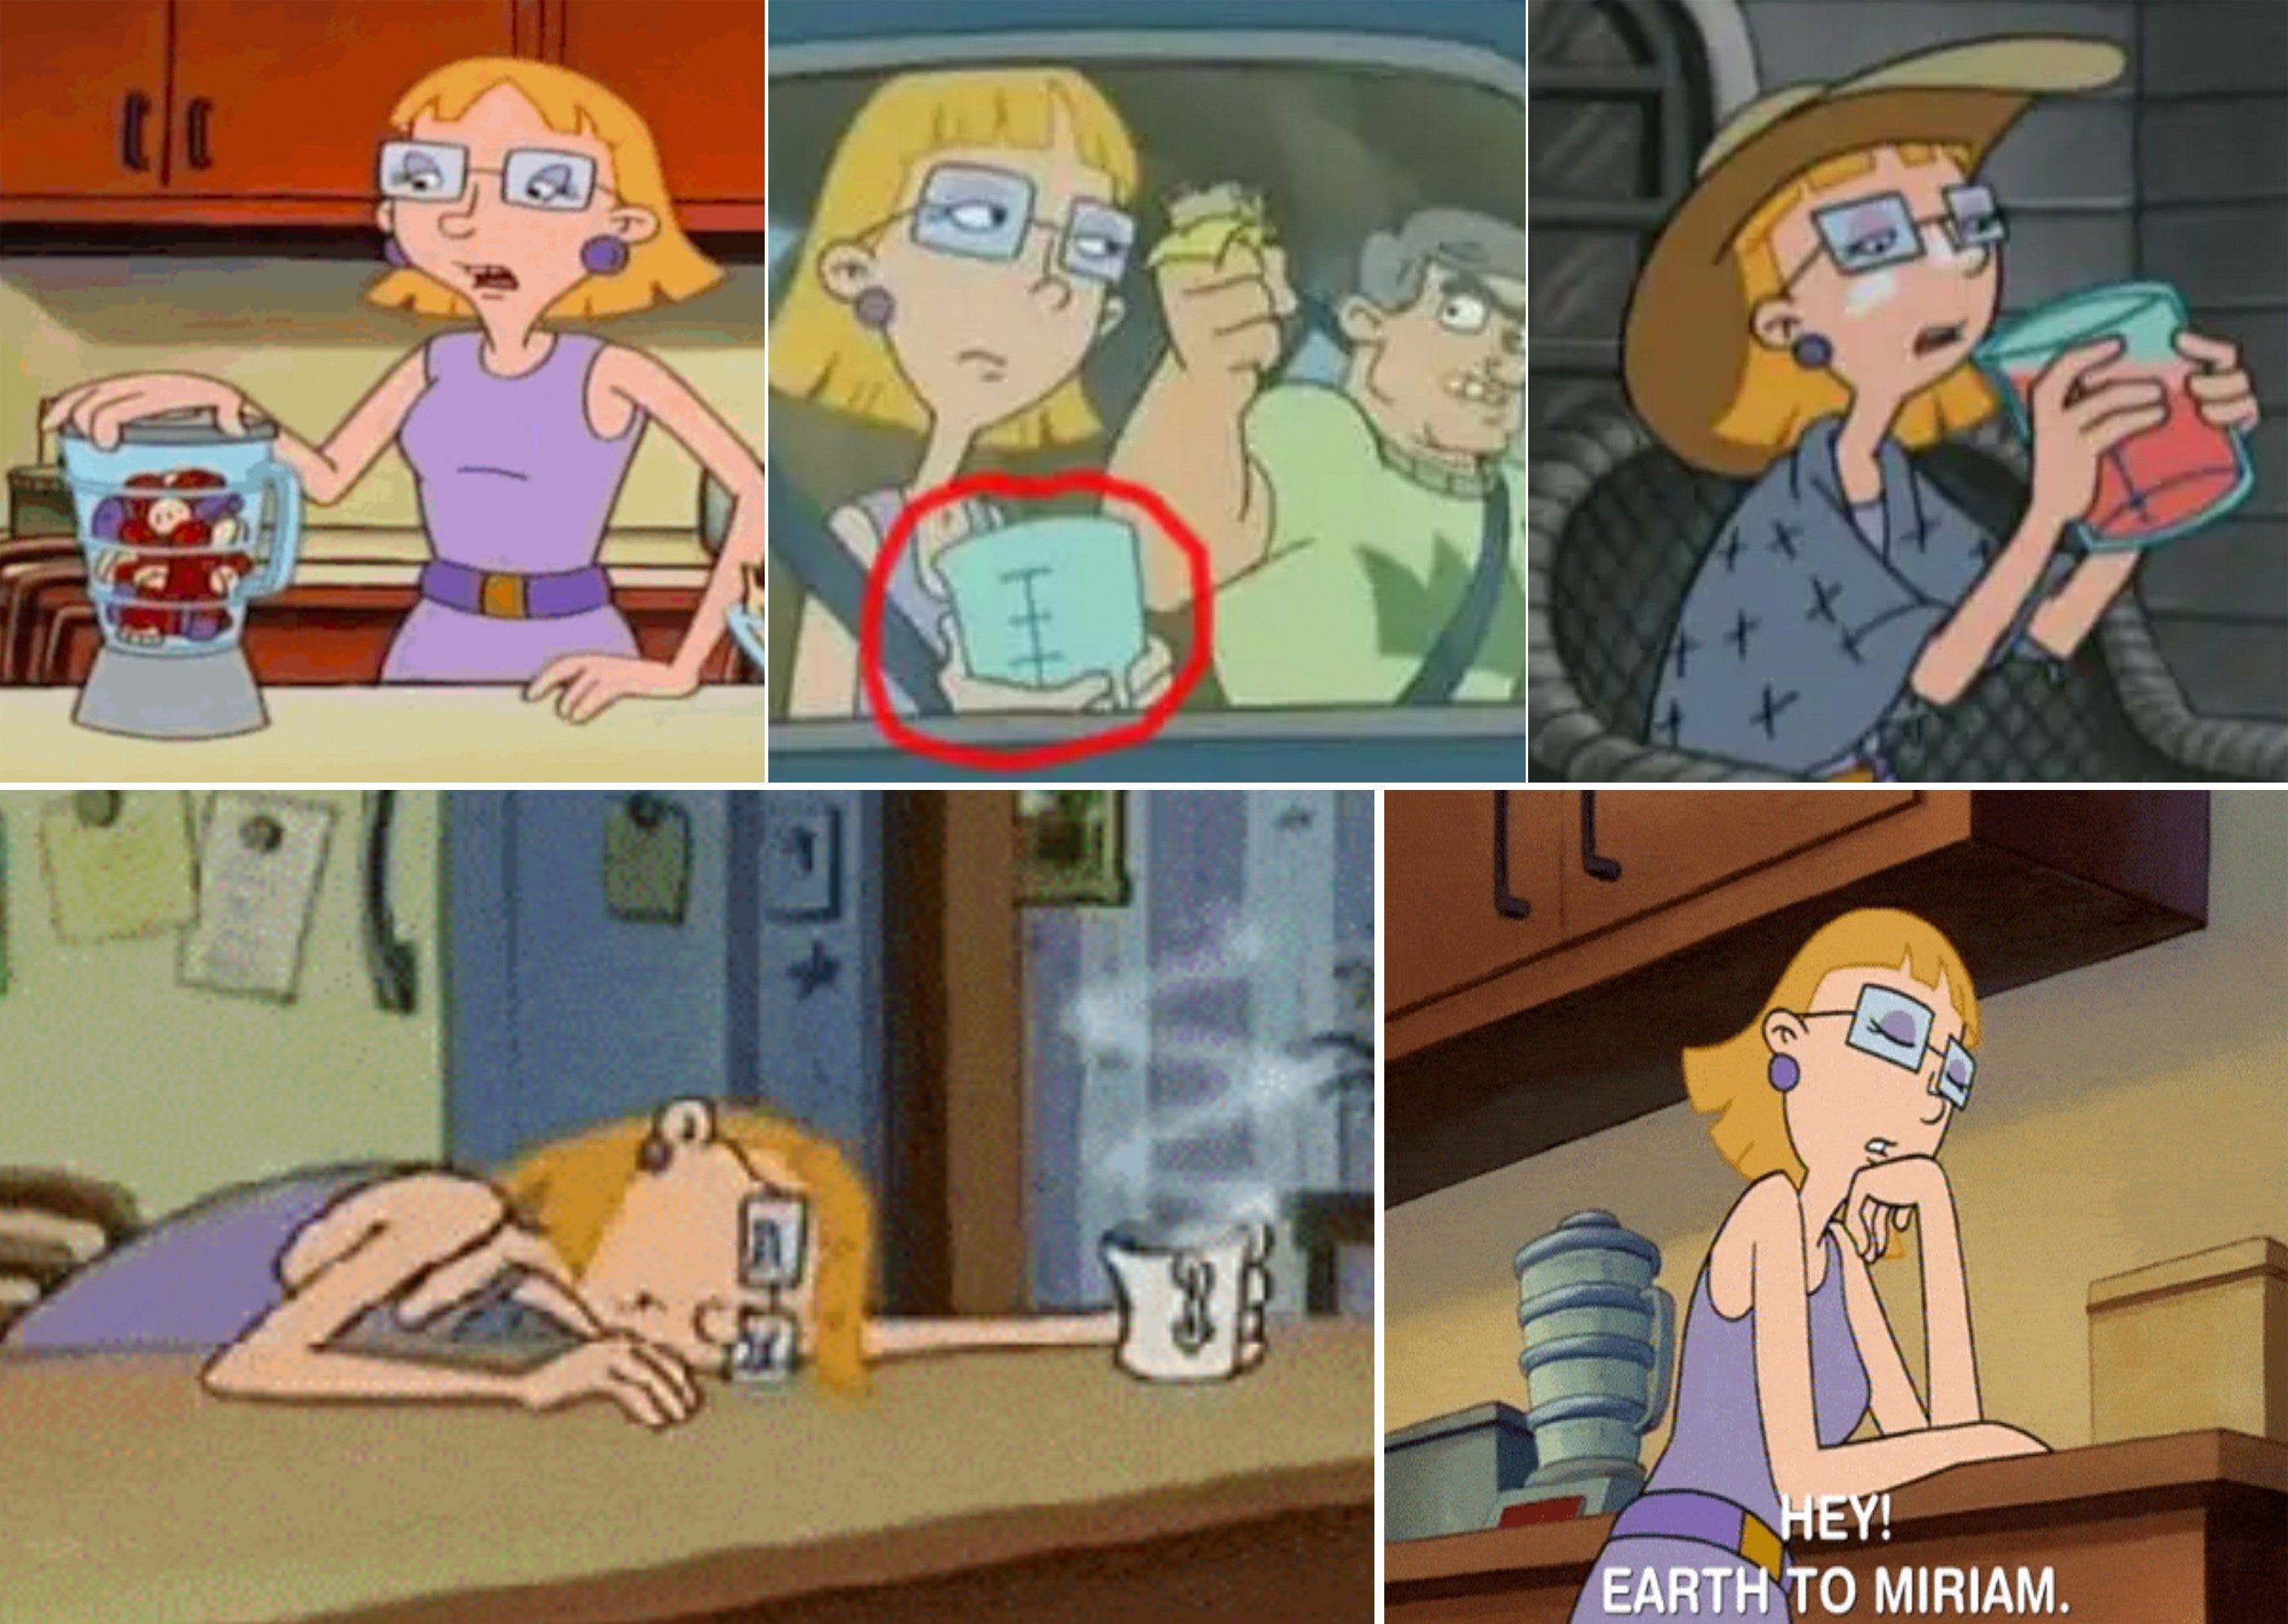 Multiple screenshots from the show showing Helga drinking something and always passed out